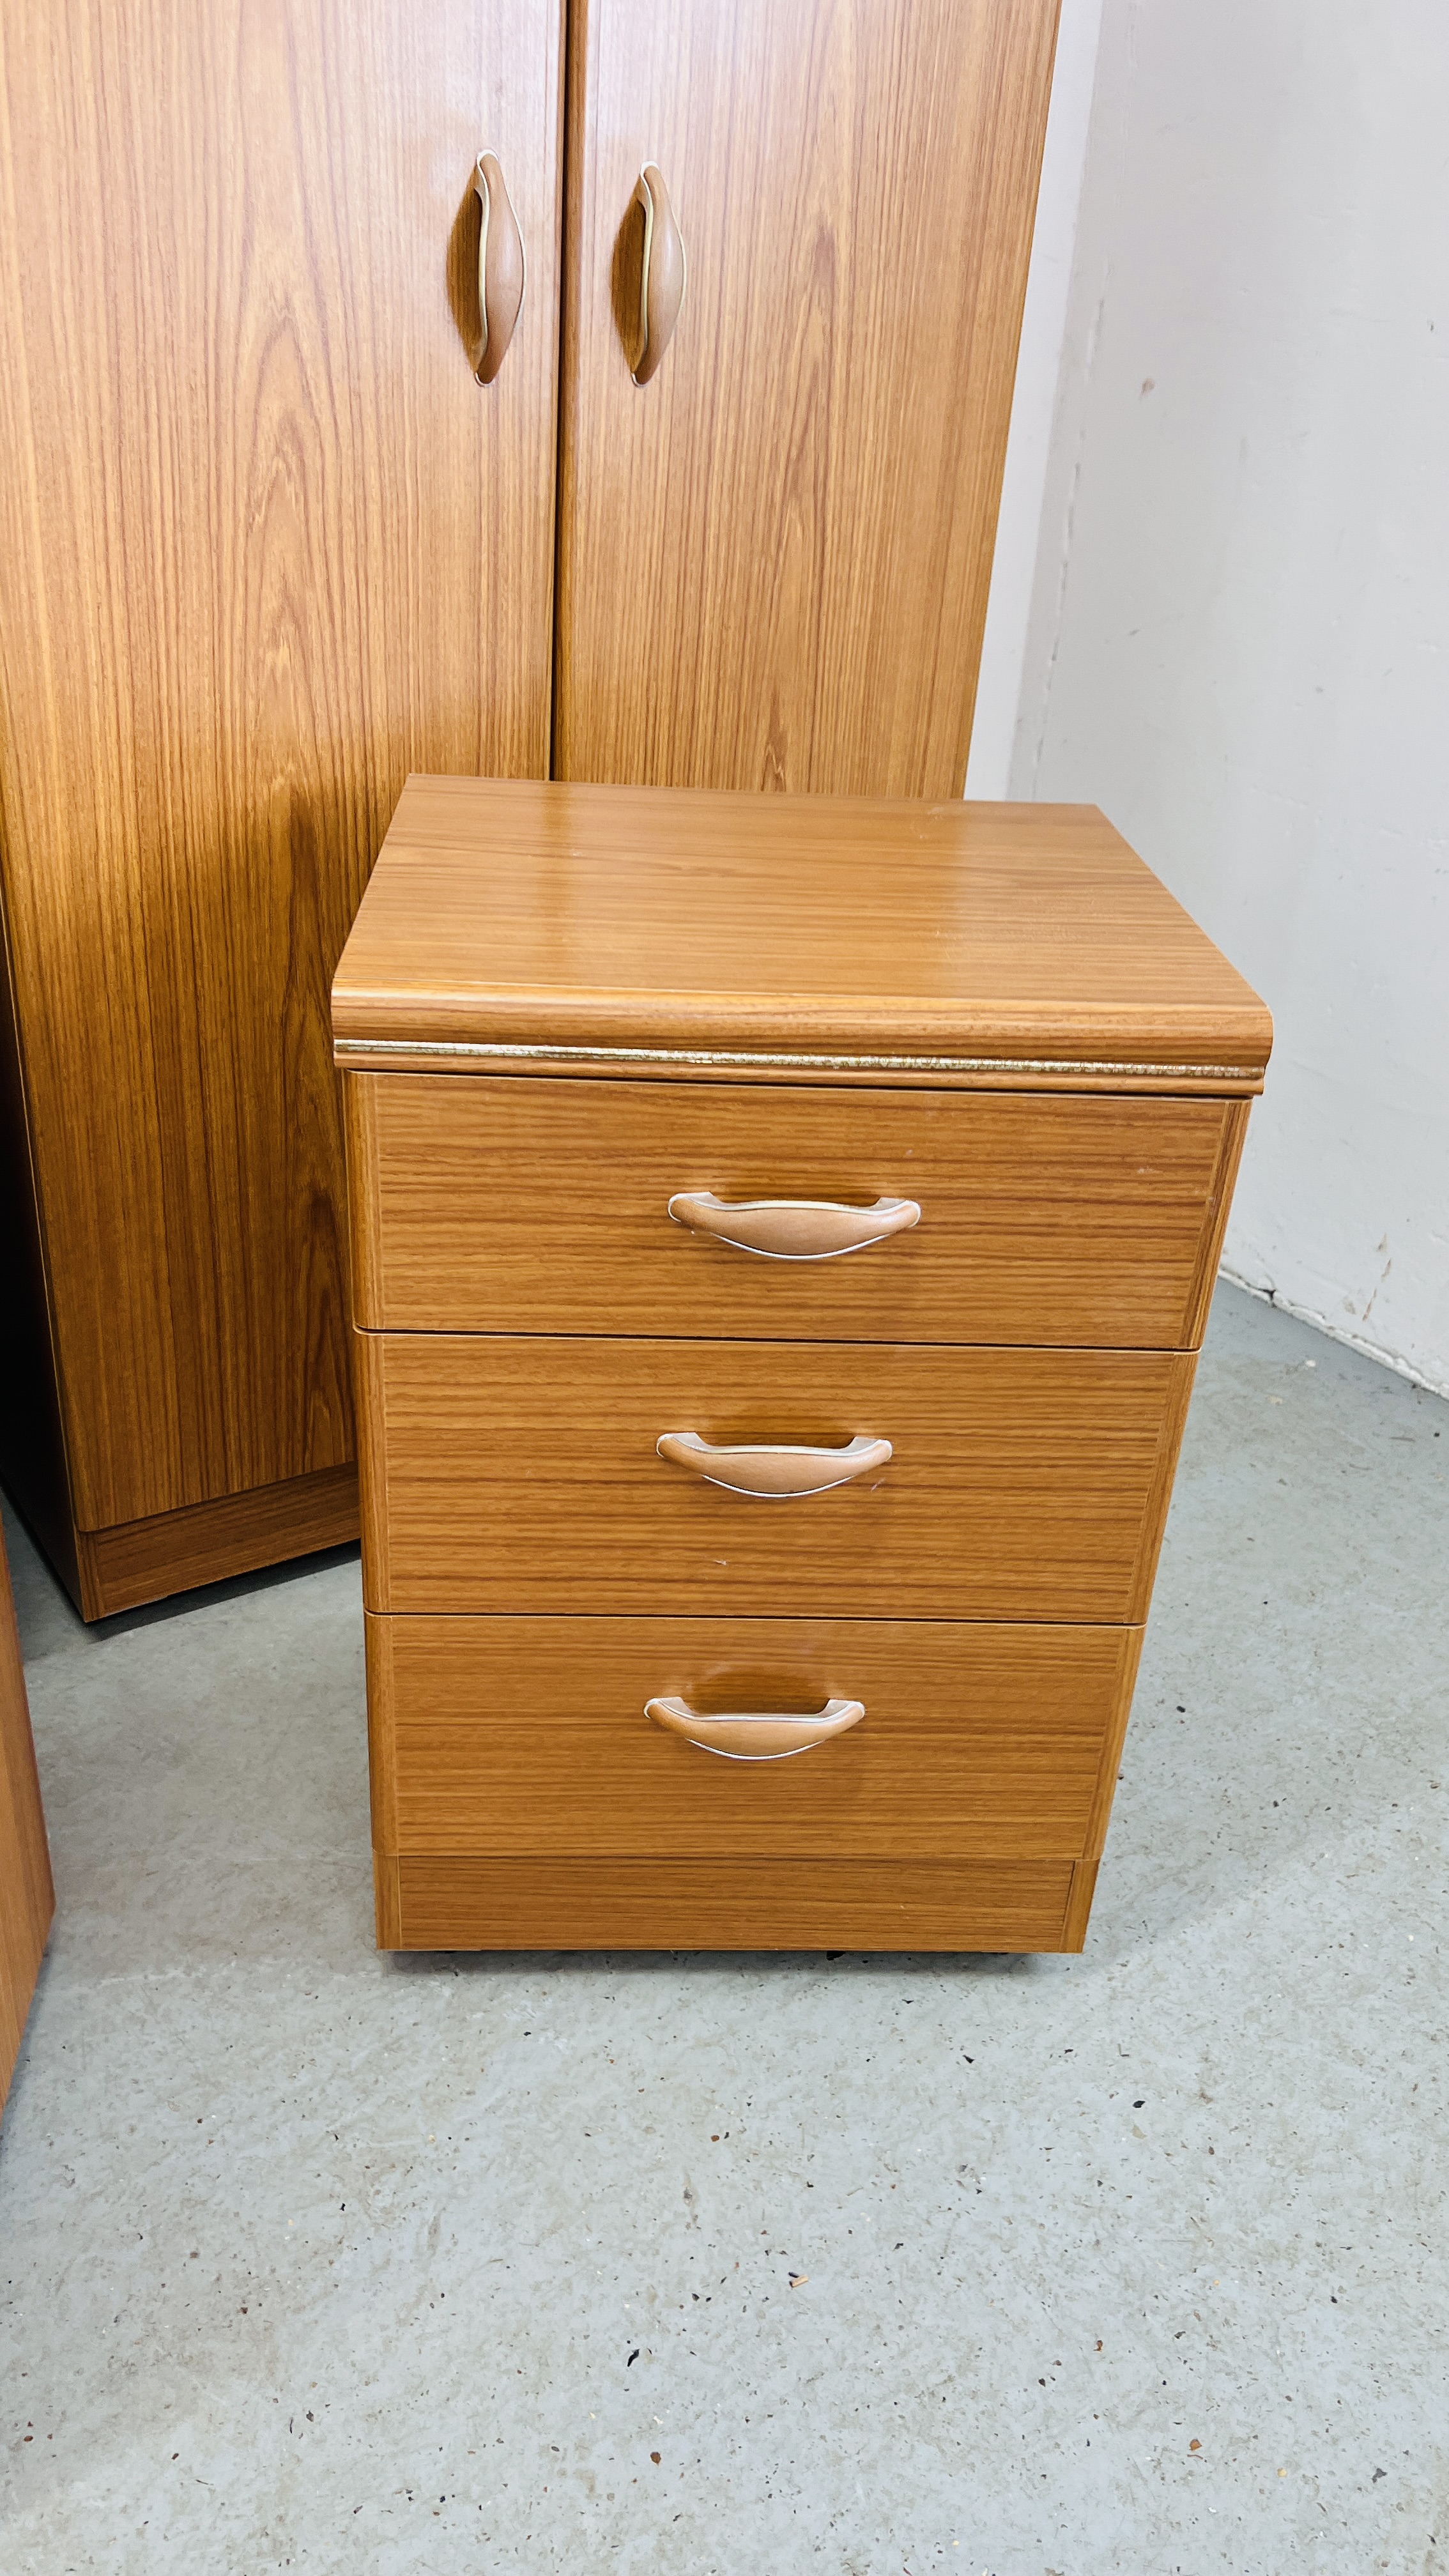 PAIR OF OAK FINISH TWO DOOR WARDROBES AND A PAIR OF MATCHING THREE DRAWER BEDSIDE CHESTS. - Image 3 of 5